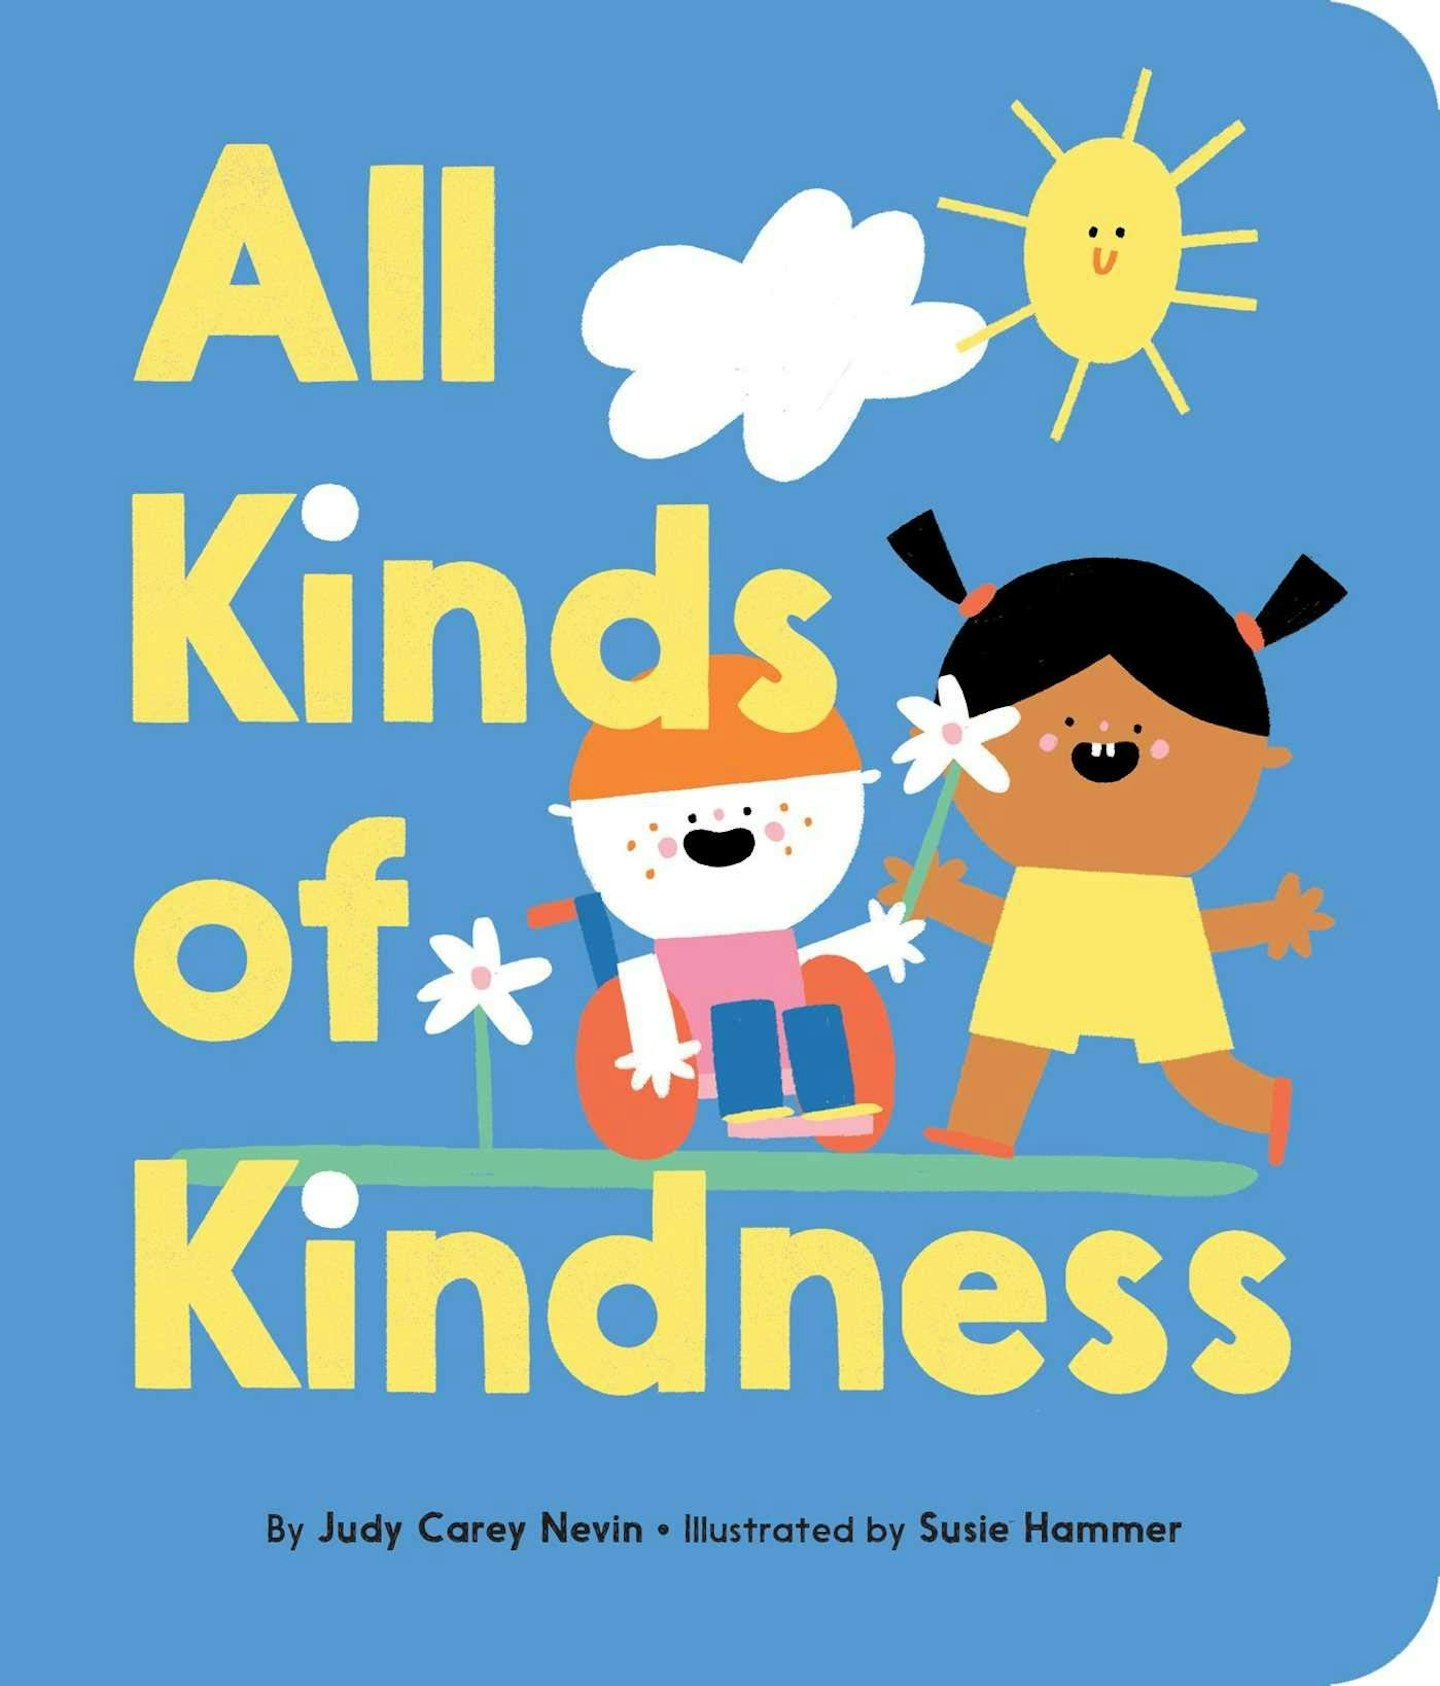 Best children's books about kindness